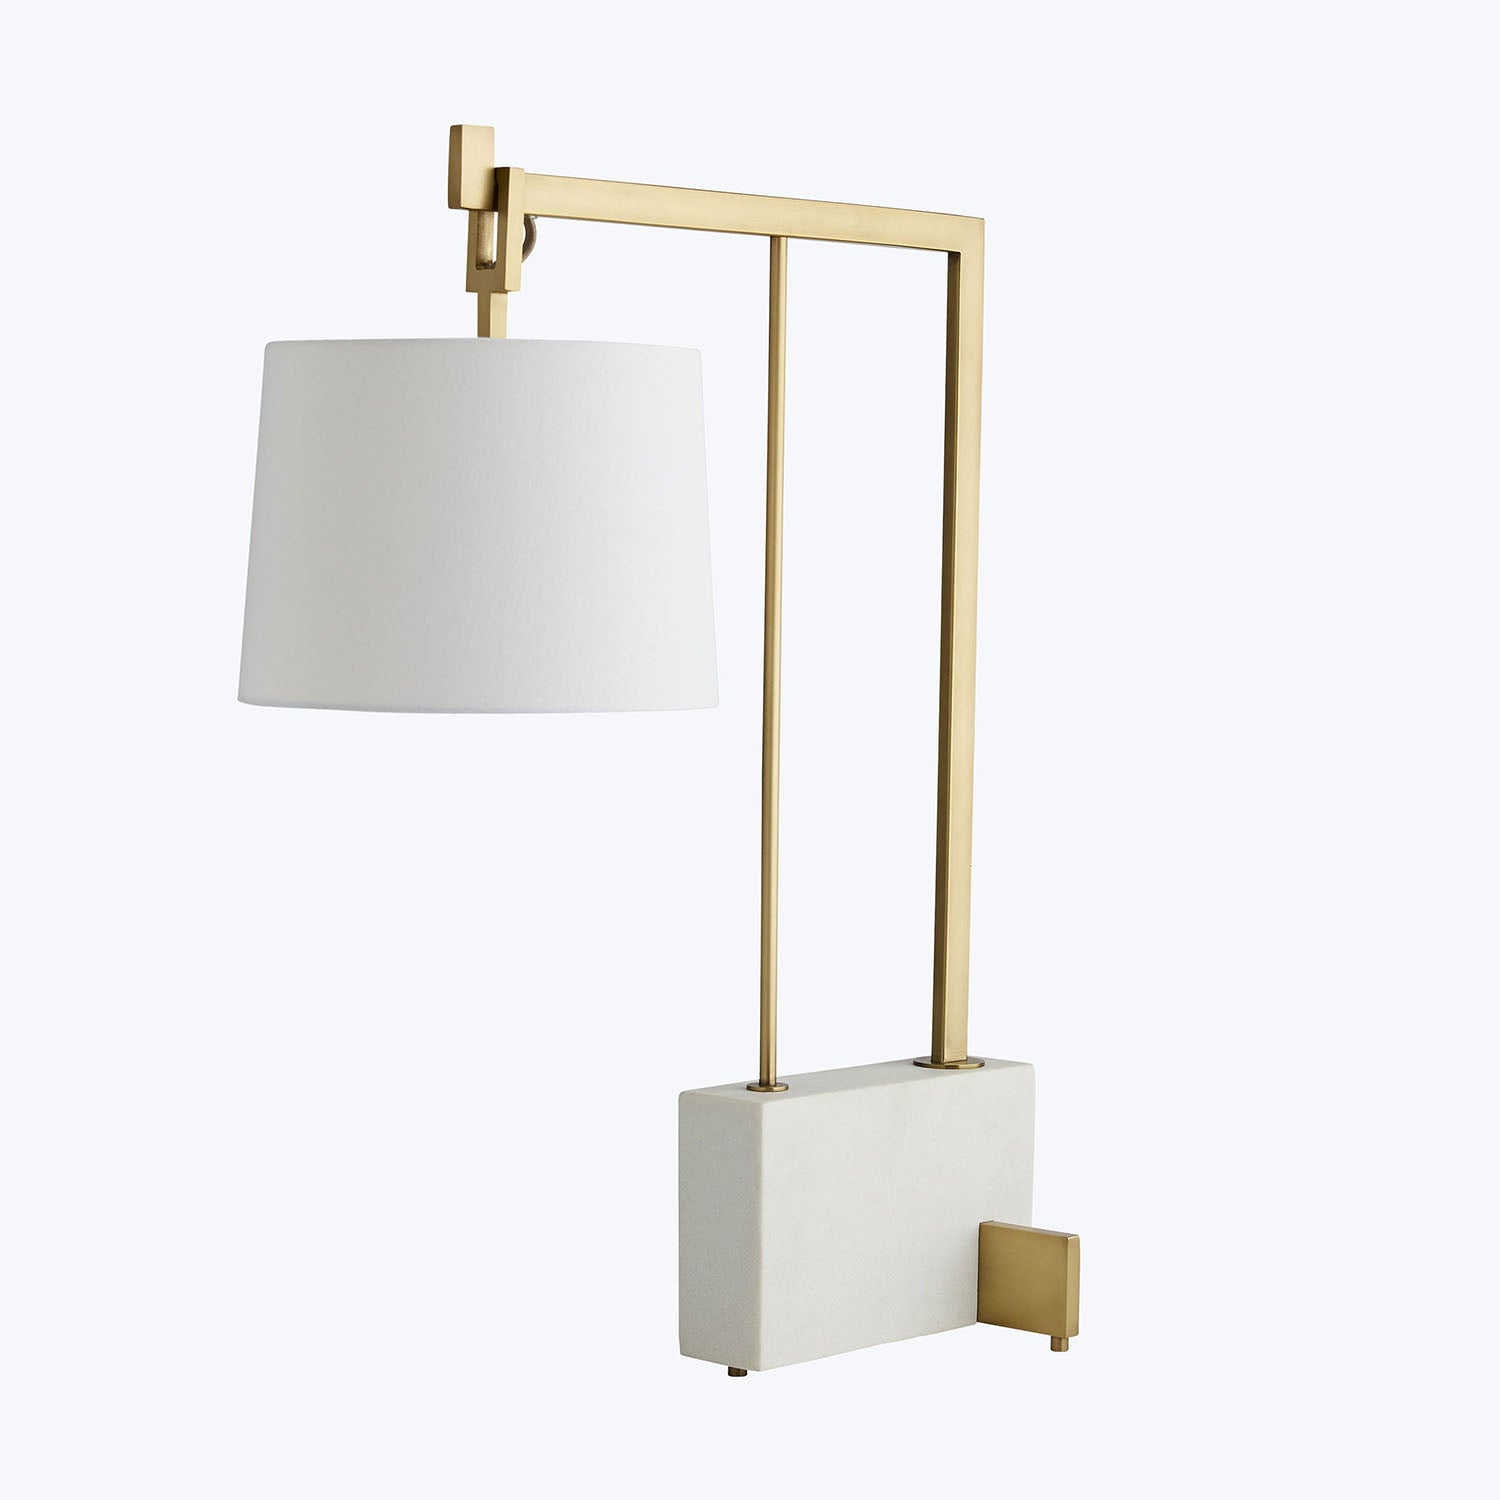 Modern table lamp with sleek golden frame and white shade.